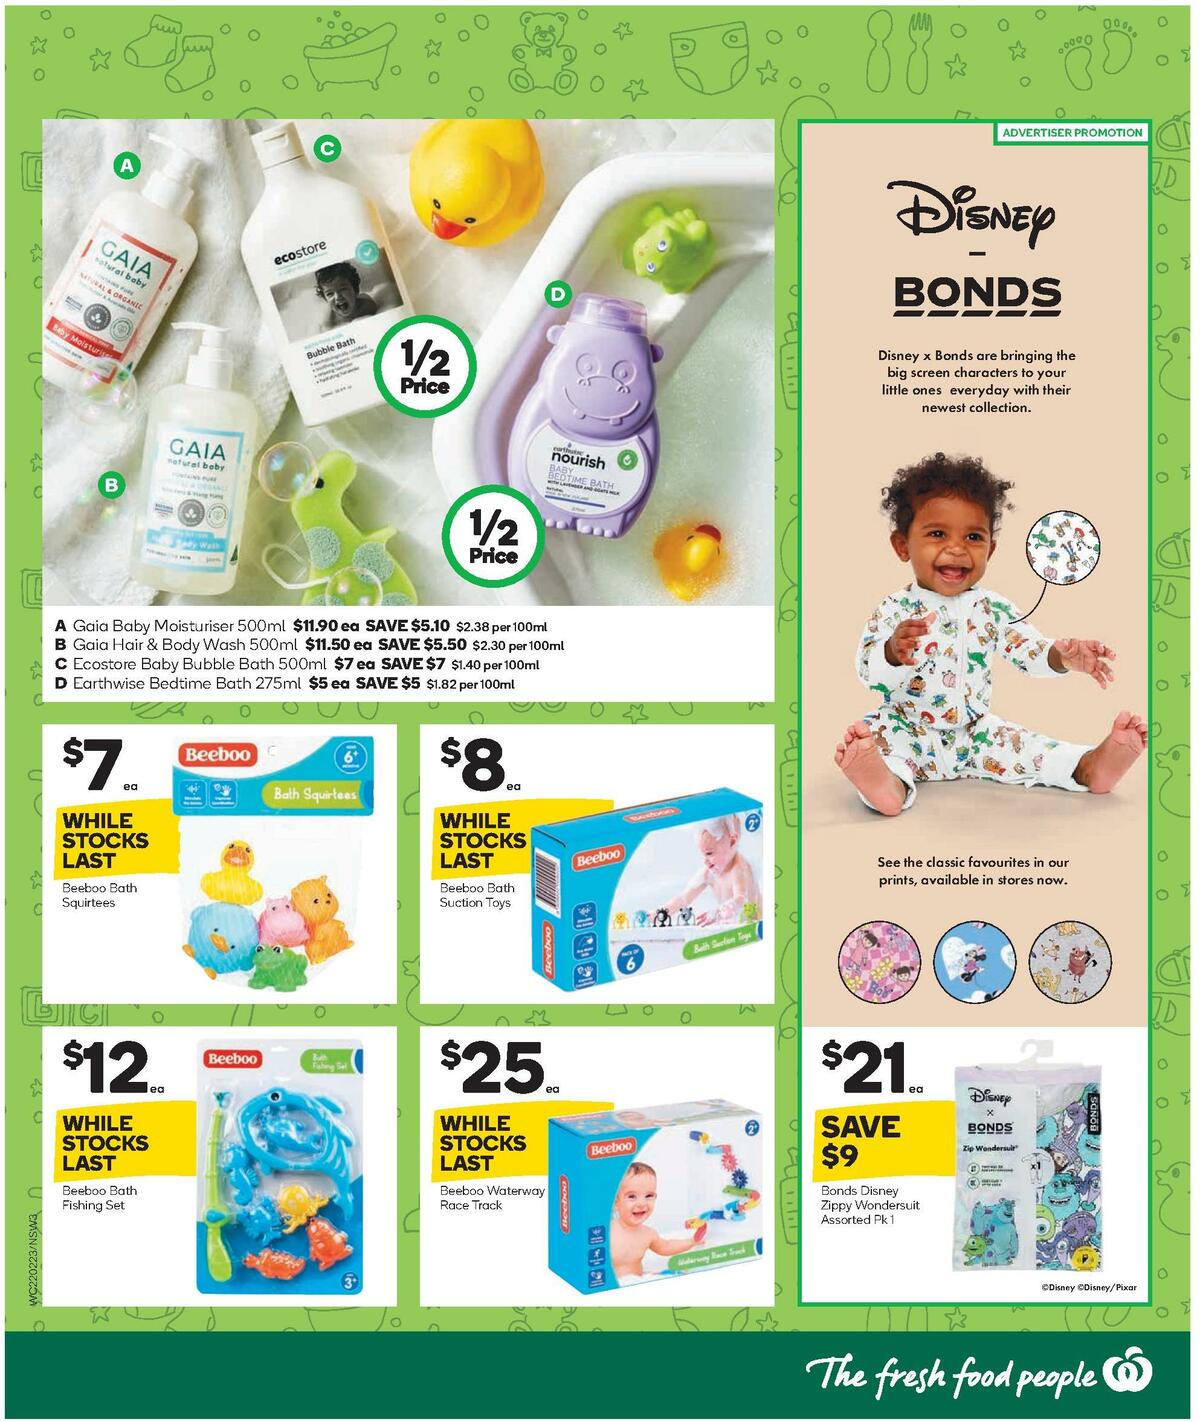 Woolworths Baby & Toddler Event Catalogues from 22 February